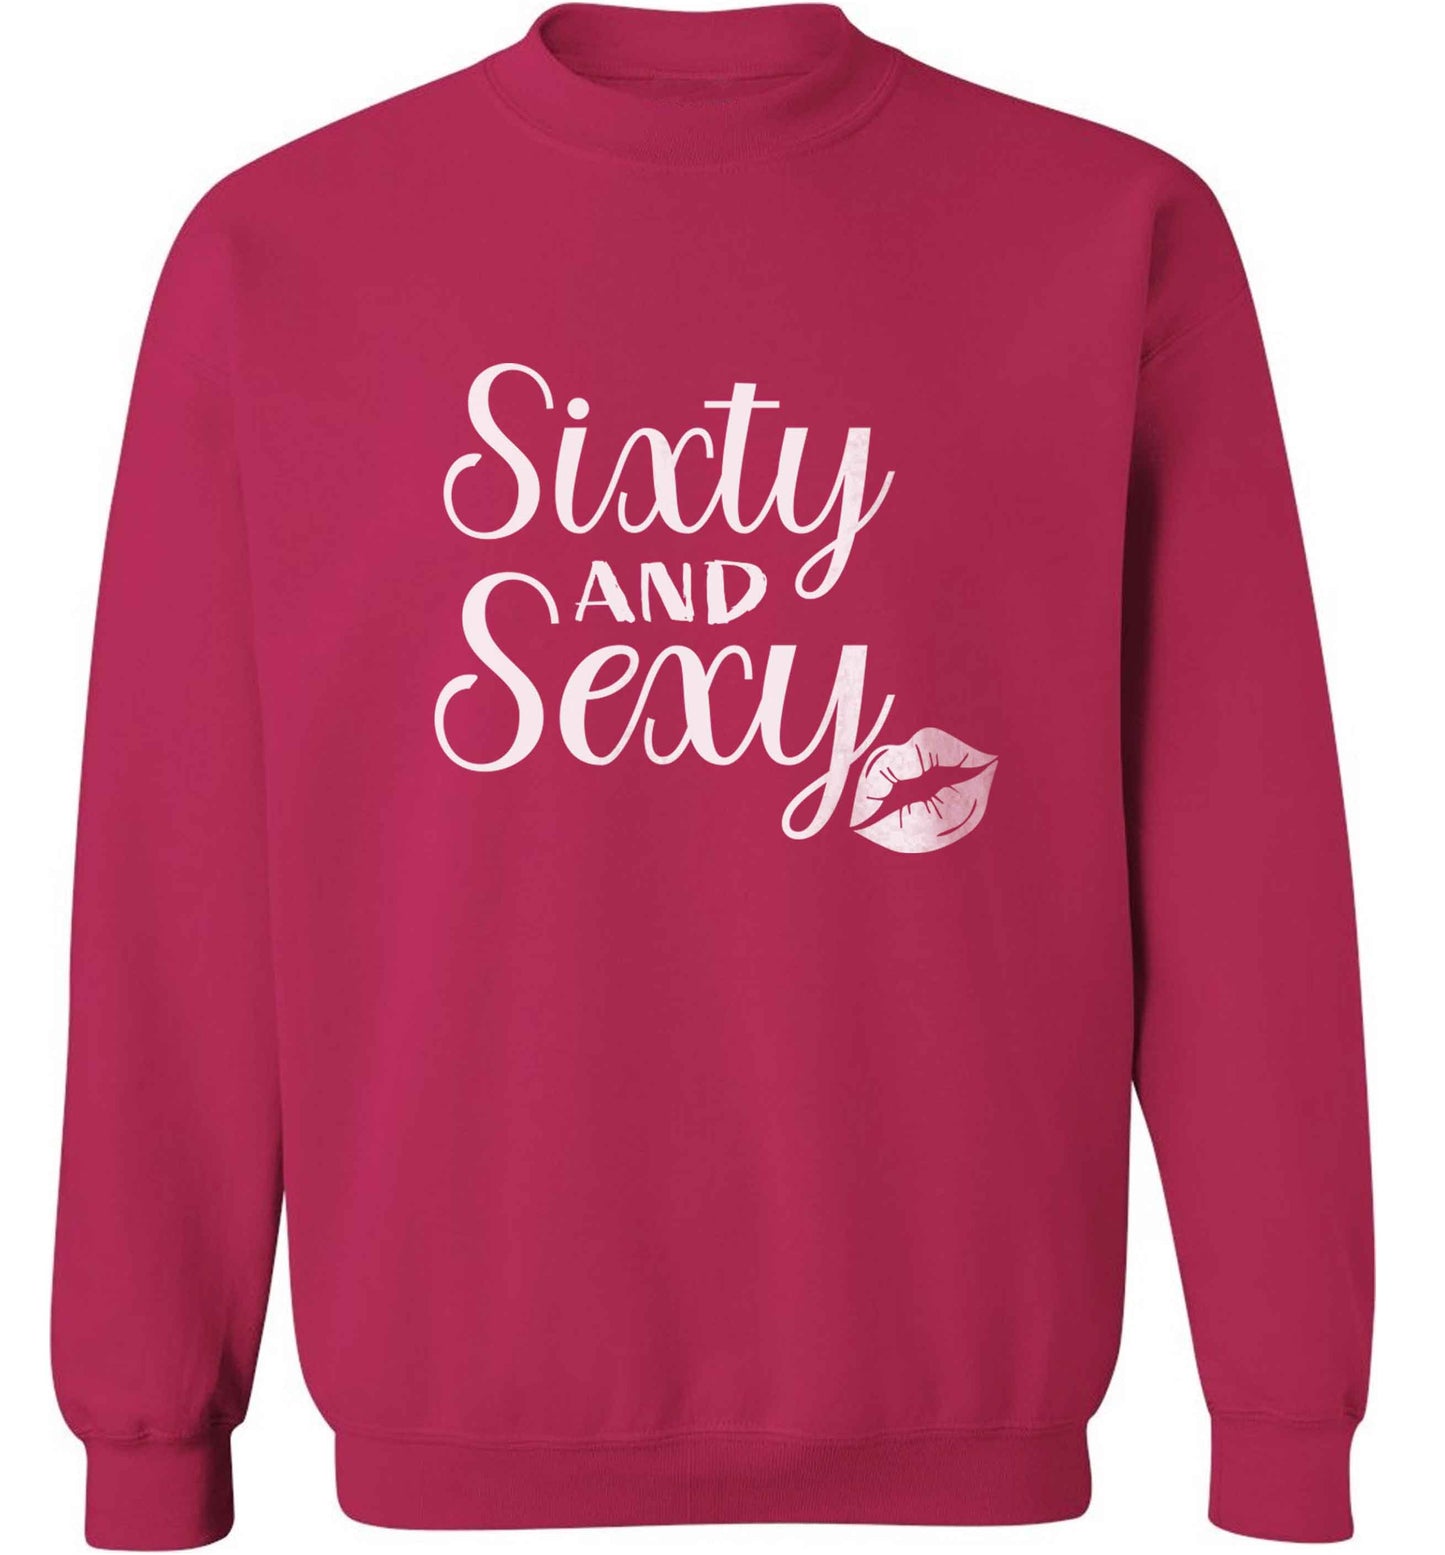 Sixty and sexy adult's unisex pink sweater 2XL